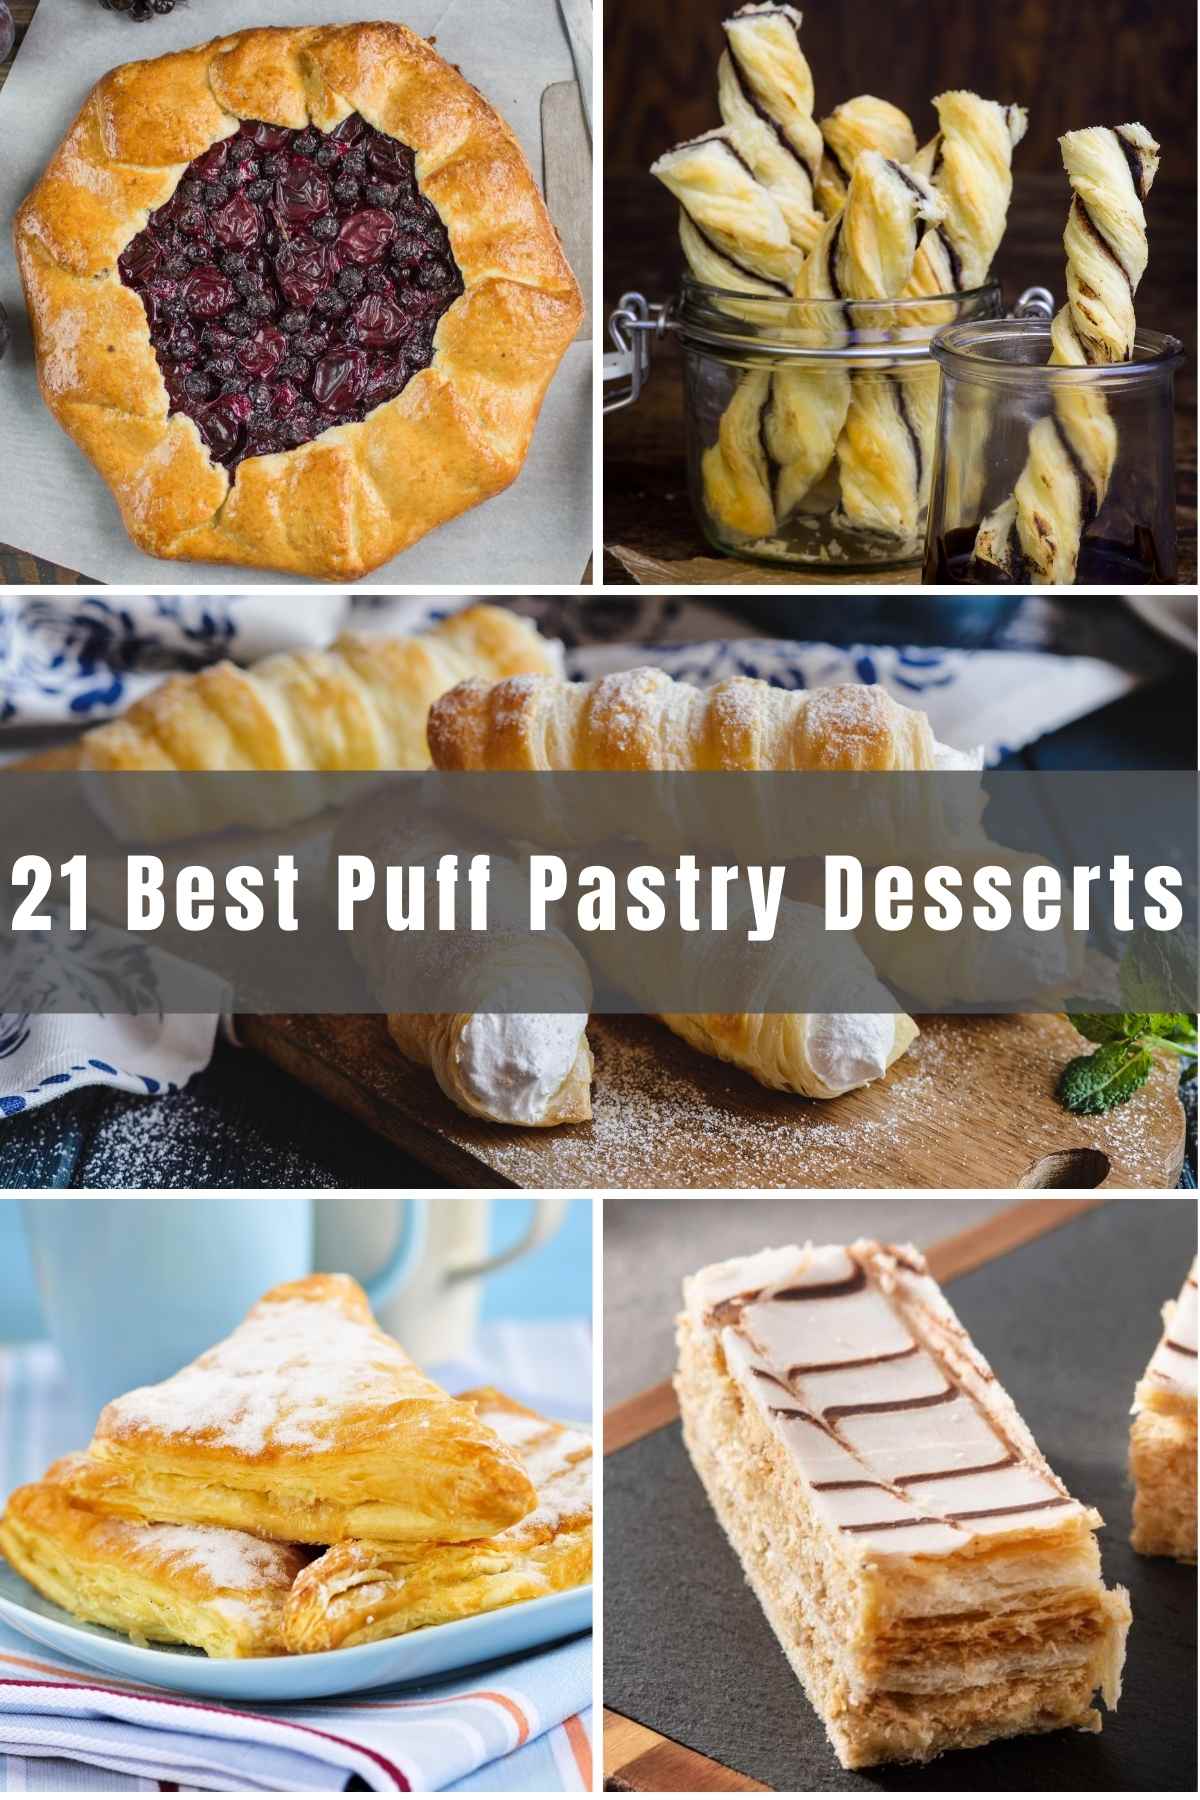 Puff Pastry Desserts are flaky, delicious and so versatile. It’s easy to get started on making your own French desserts with store-bought puff pastry.